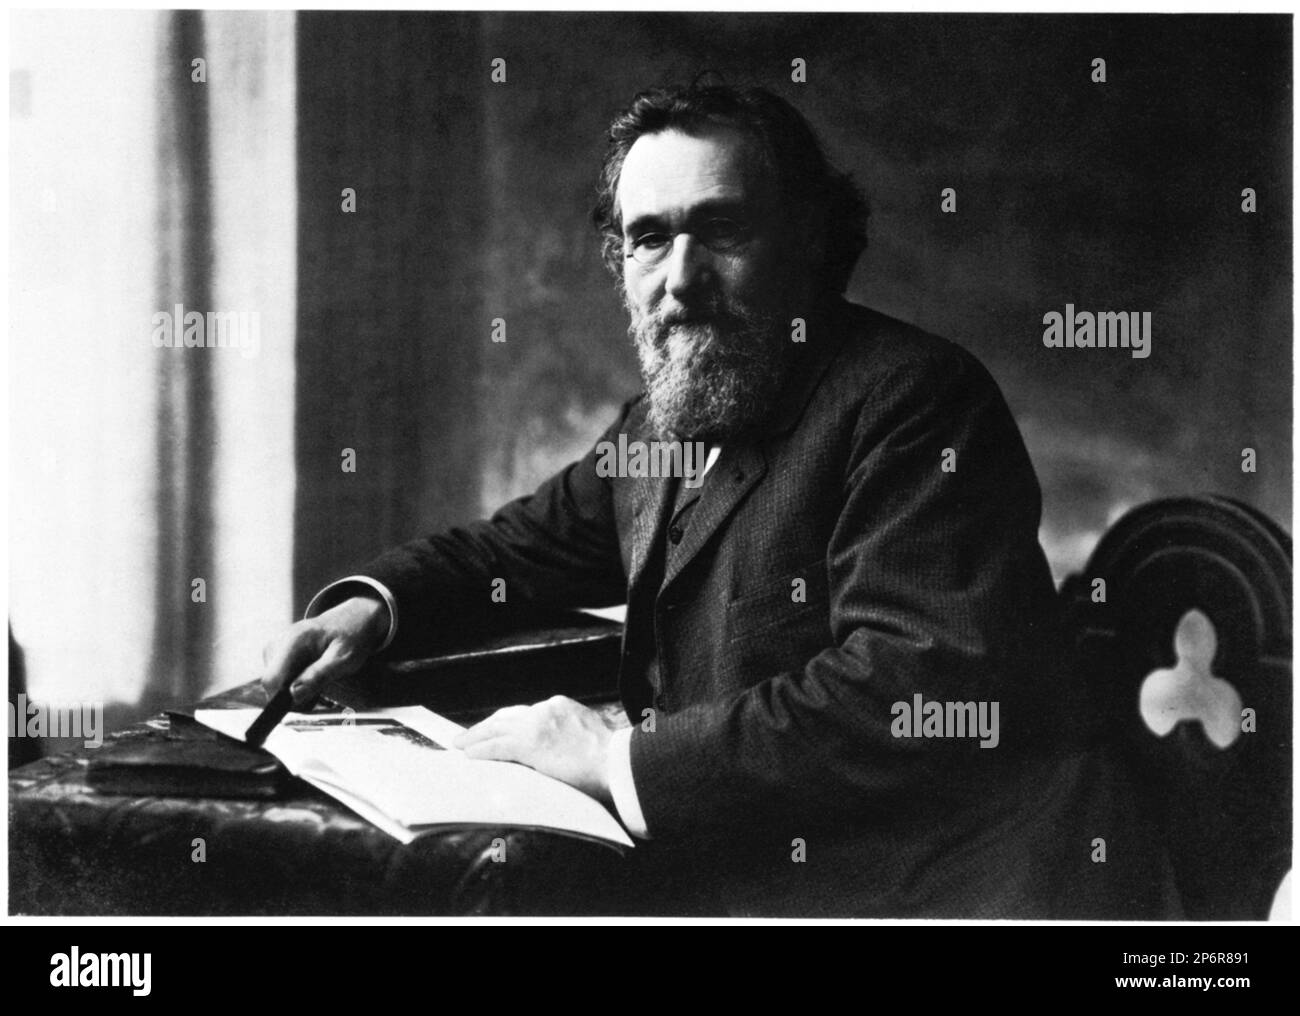 1890 ca , Paris , France : ILJA ILJITSCH METSCHNIKOW (also known as Elie Metchnikoff  or Mechnikov , 1845 - 1916 ) was a Russian microbiologist best remembered for his pioneering research into the immune system. Mechnikov received the Nobel Prize in Medicine in 1908, for his work on phagocytosis., photo by Nadar , Paris , France . - foto storiche - foto storica  - scienziato - scientist  - portrait - ritratto  - RUSSIA - FRANCIA - barba - beard - occhiali - pince nez - lens - glasses - MEDICO - MEDICINA - medicine  - SCIENZA - SCIENCE  - BIOLOGIST - BIOLOGO - BIOLOGIA - Metschnicof  ---- Archi Stock Photo